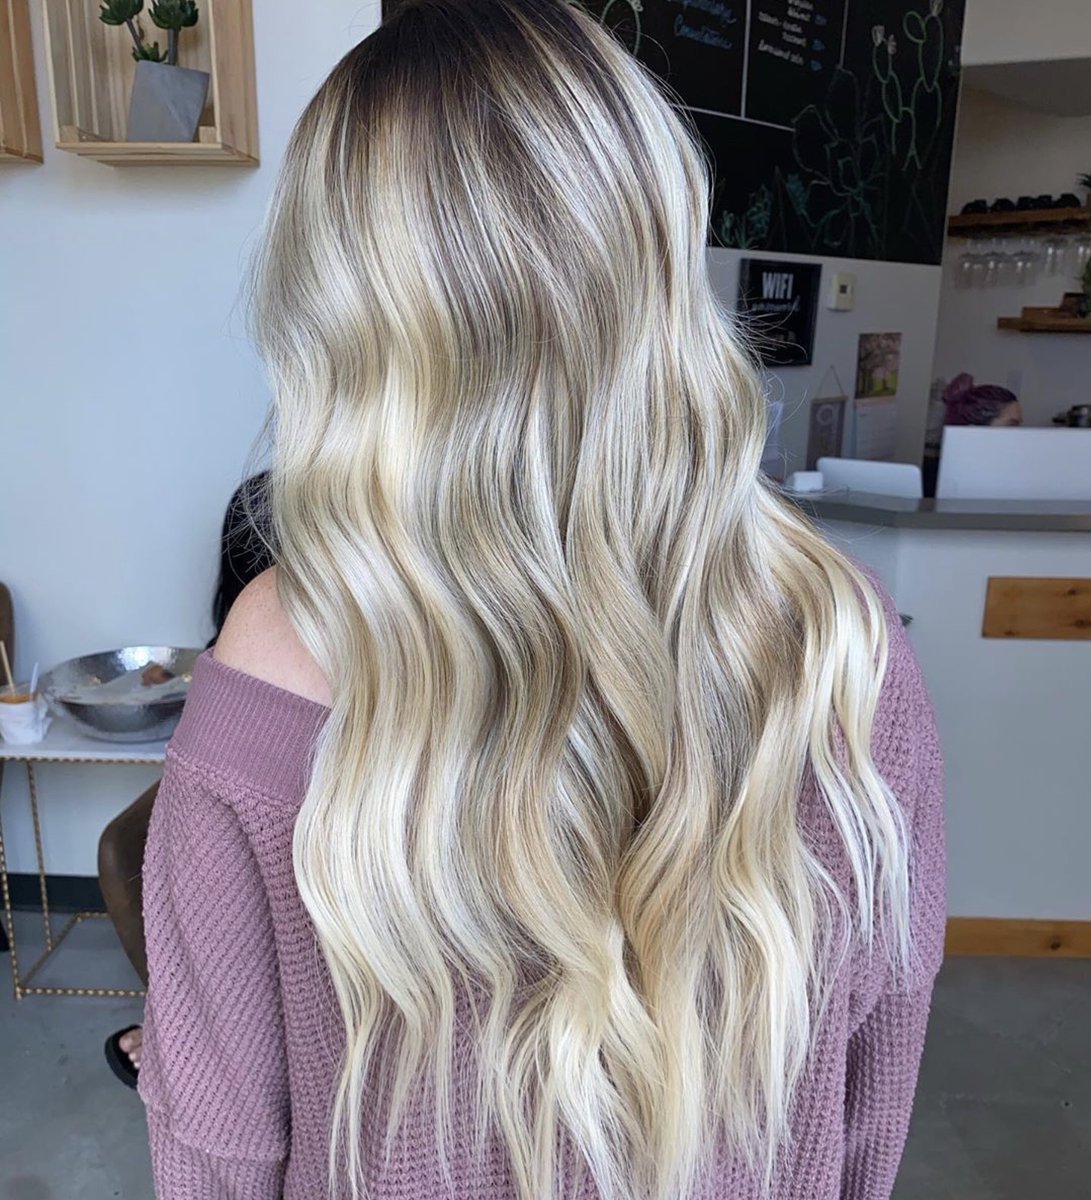 A blonde that dreams are made of! We are in awe of this dreamy creation by @_rozzmariehair, giving us some serious #hairspo

#asp #aspamerica #hair #blondehair #instaworthyhair #hairdresser